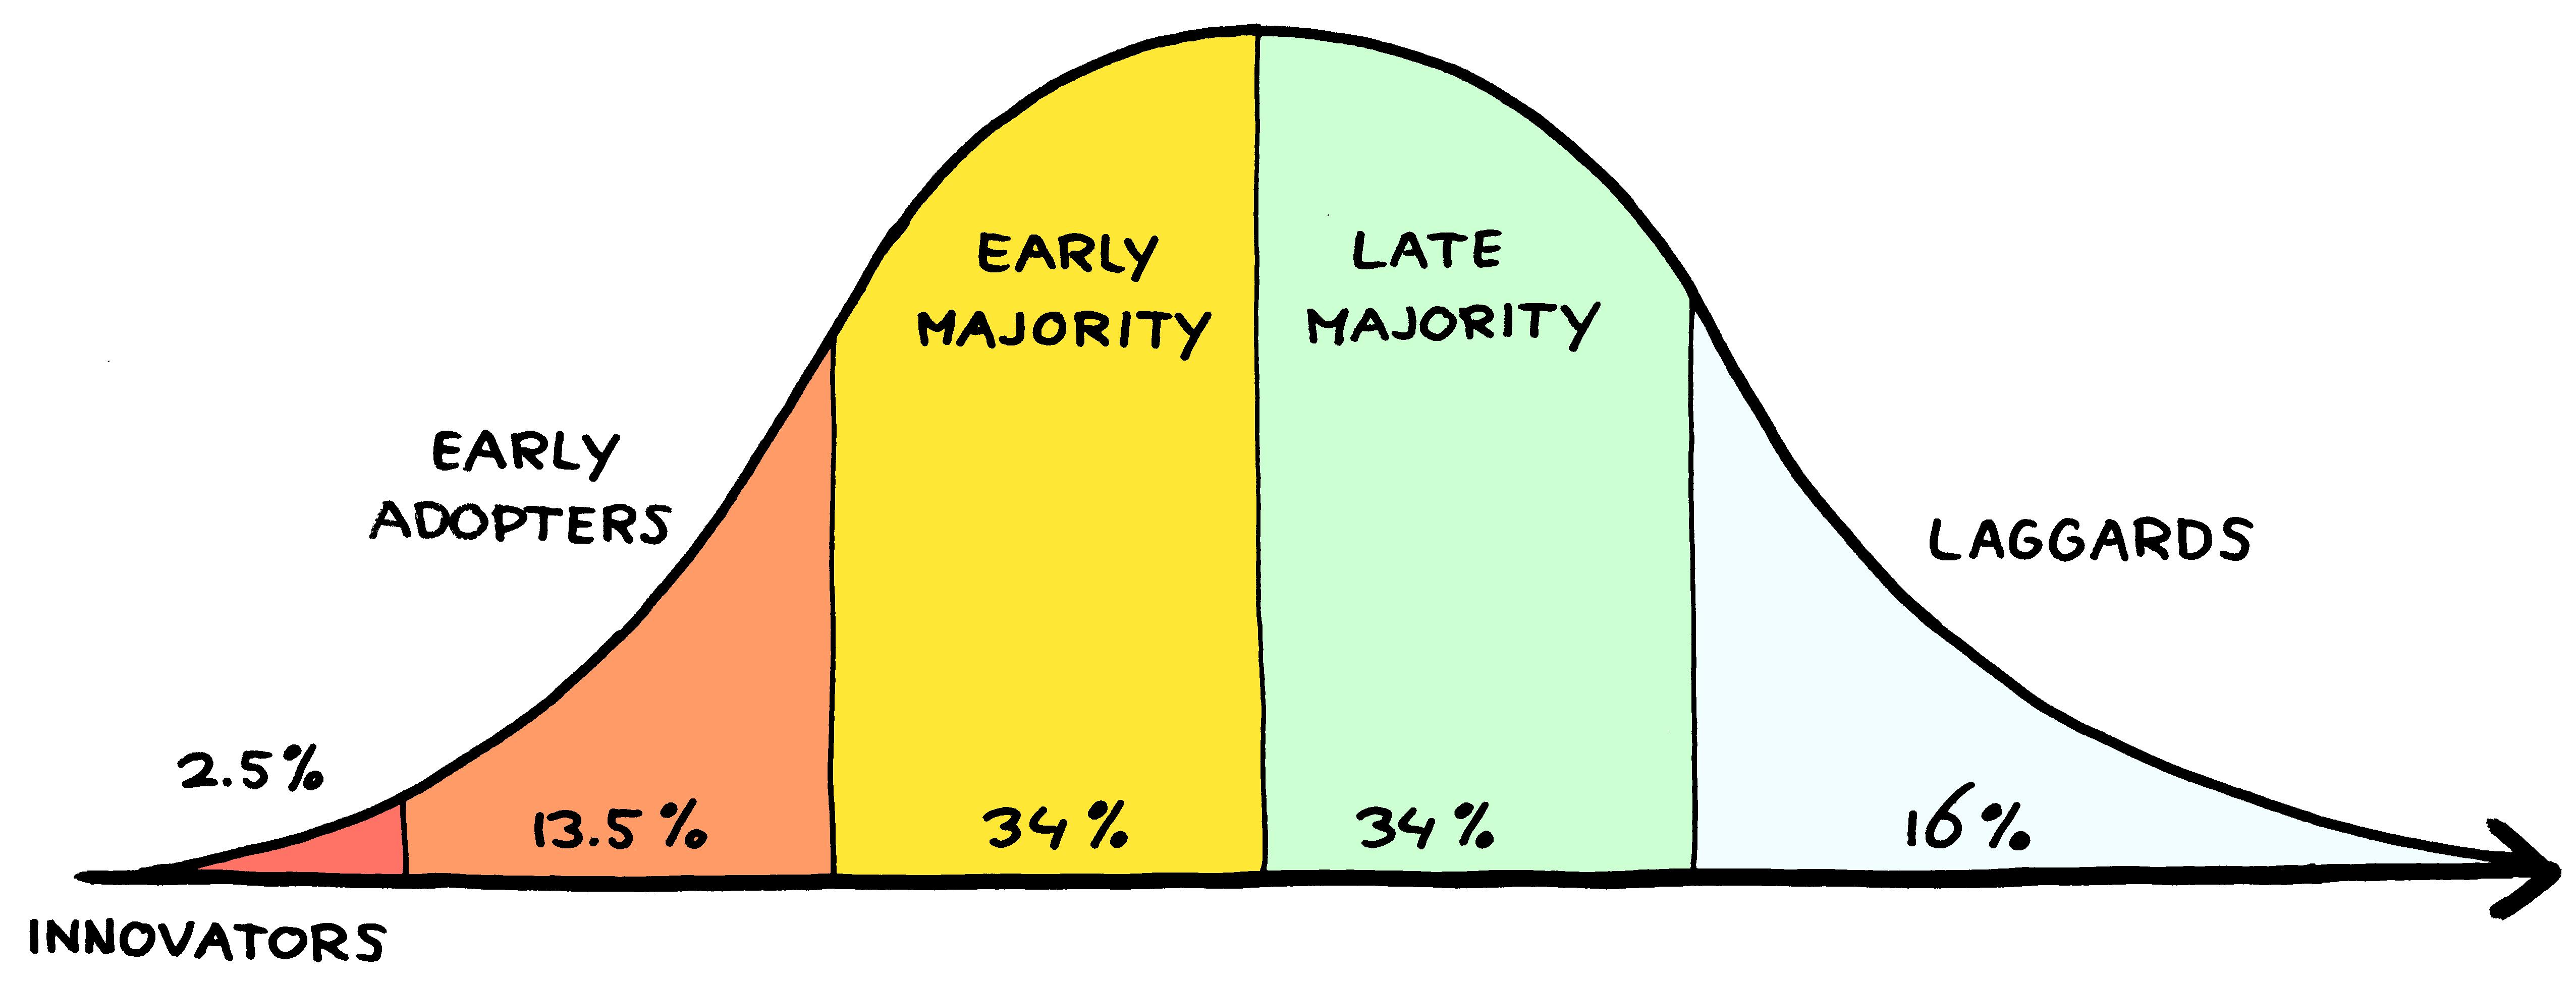 Bell curve depicting the diffusion of innovation theory - 2.5 % are innovators, 13.5% are early adopters, 34% are early majority, 34% are late majority, and 16% are laggards